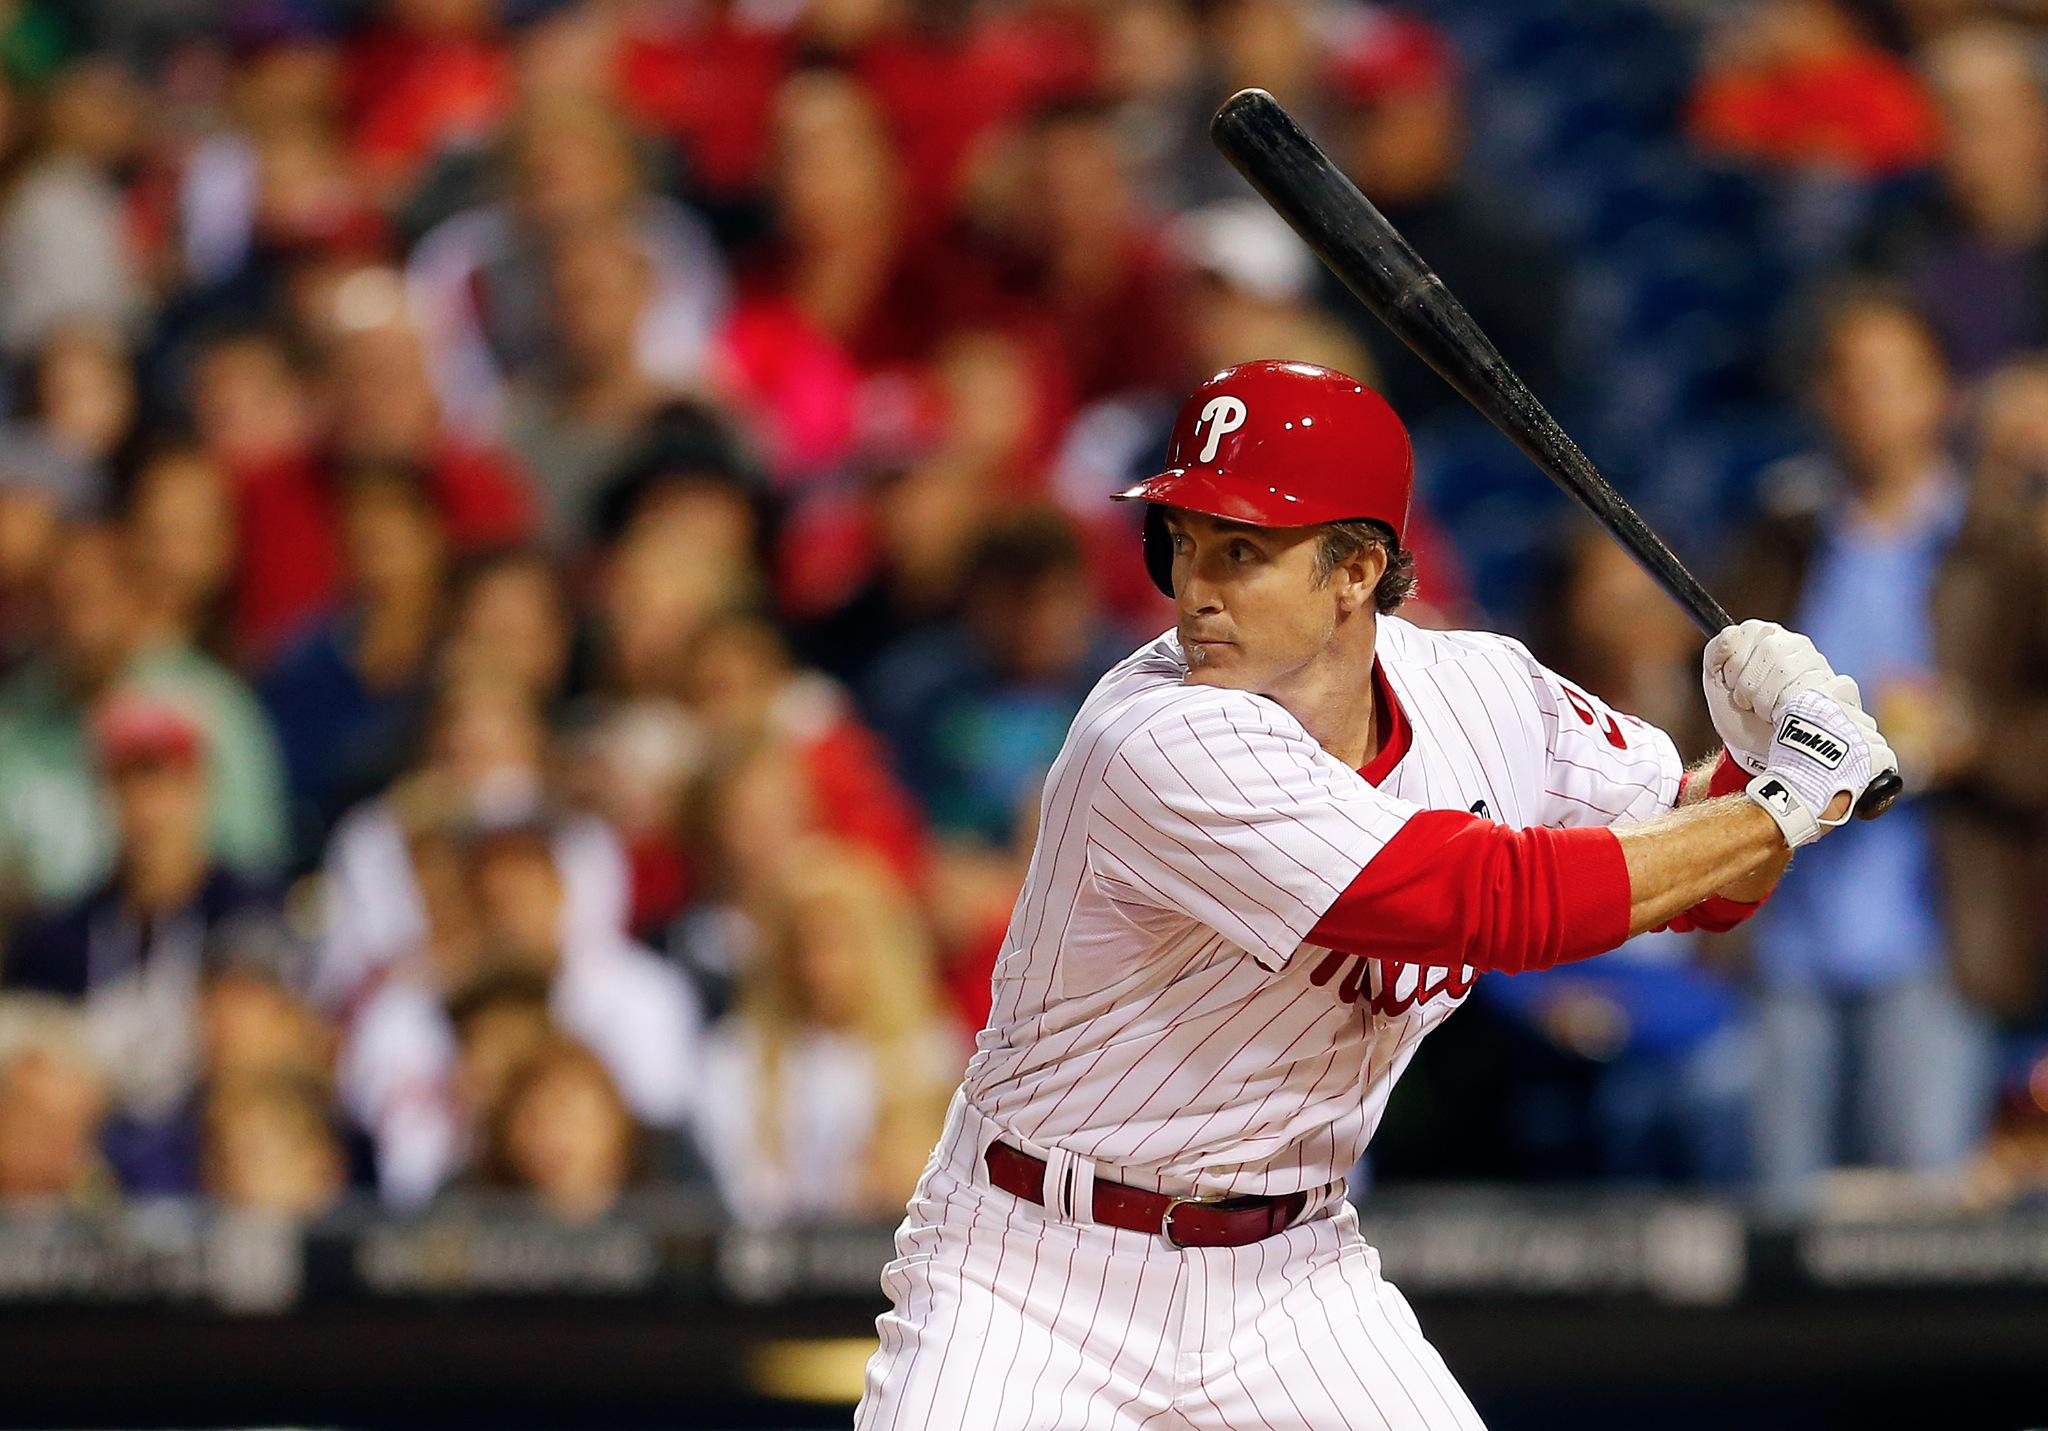 "Happy 36th Birthday to six-time All-Star &amp; 2008 Champ, Chase Utley!! 